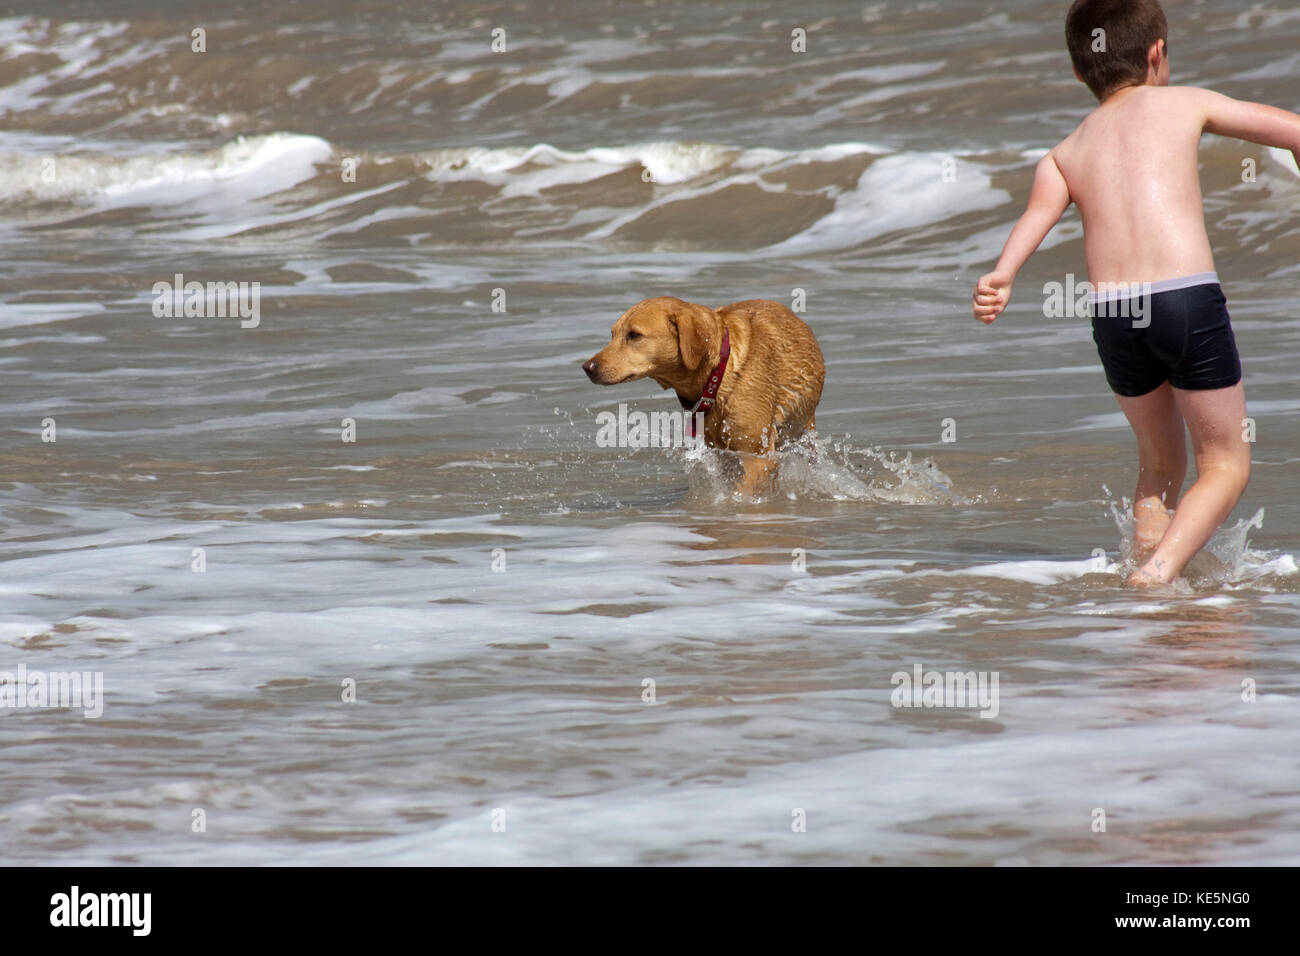 Small boy in swimming trunks and dog playing in the sea Stock Photo